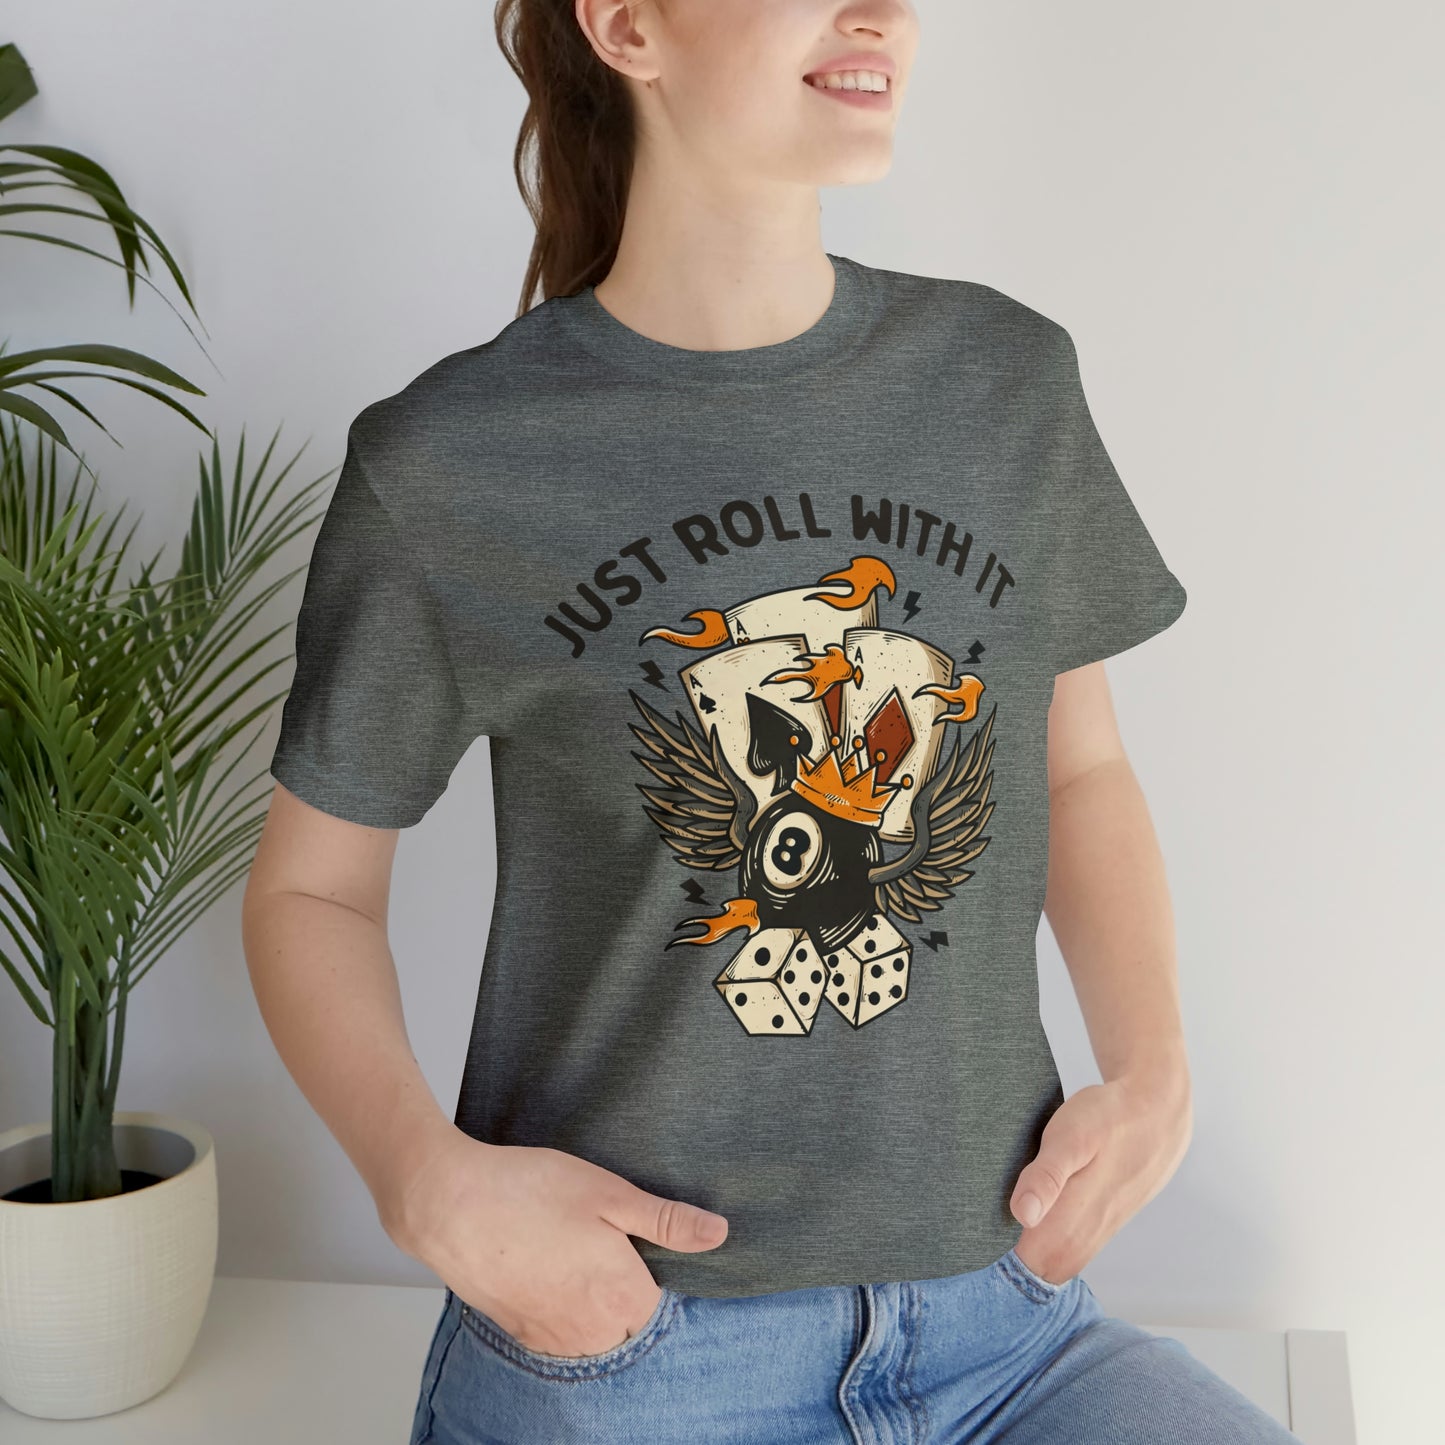 "Just Roll With It" Bella Canvas Short Sleeve Tee